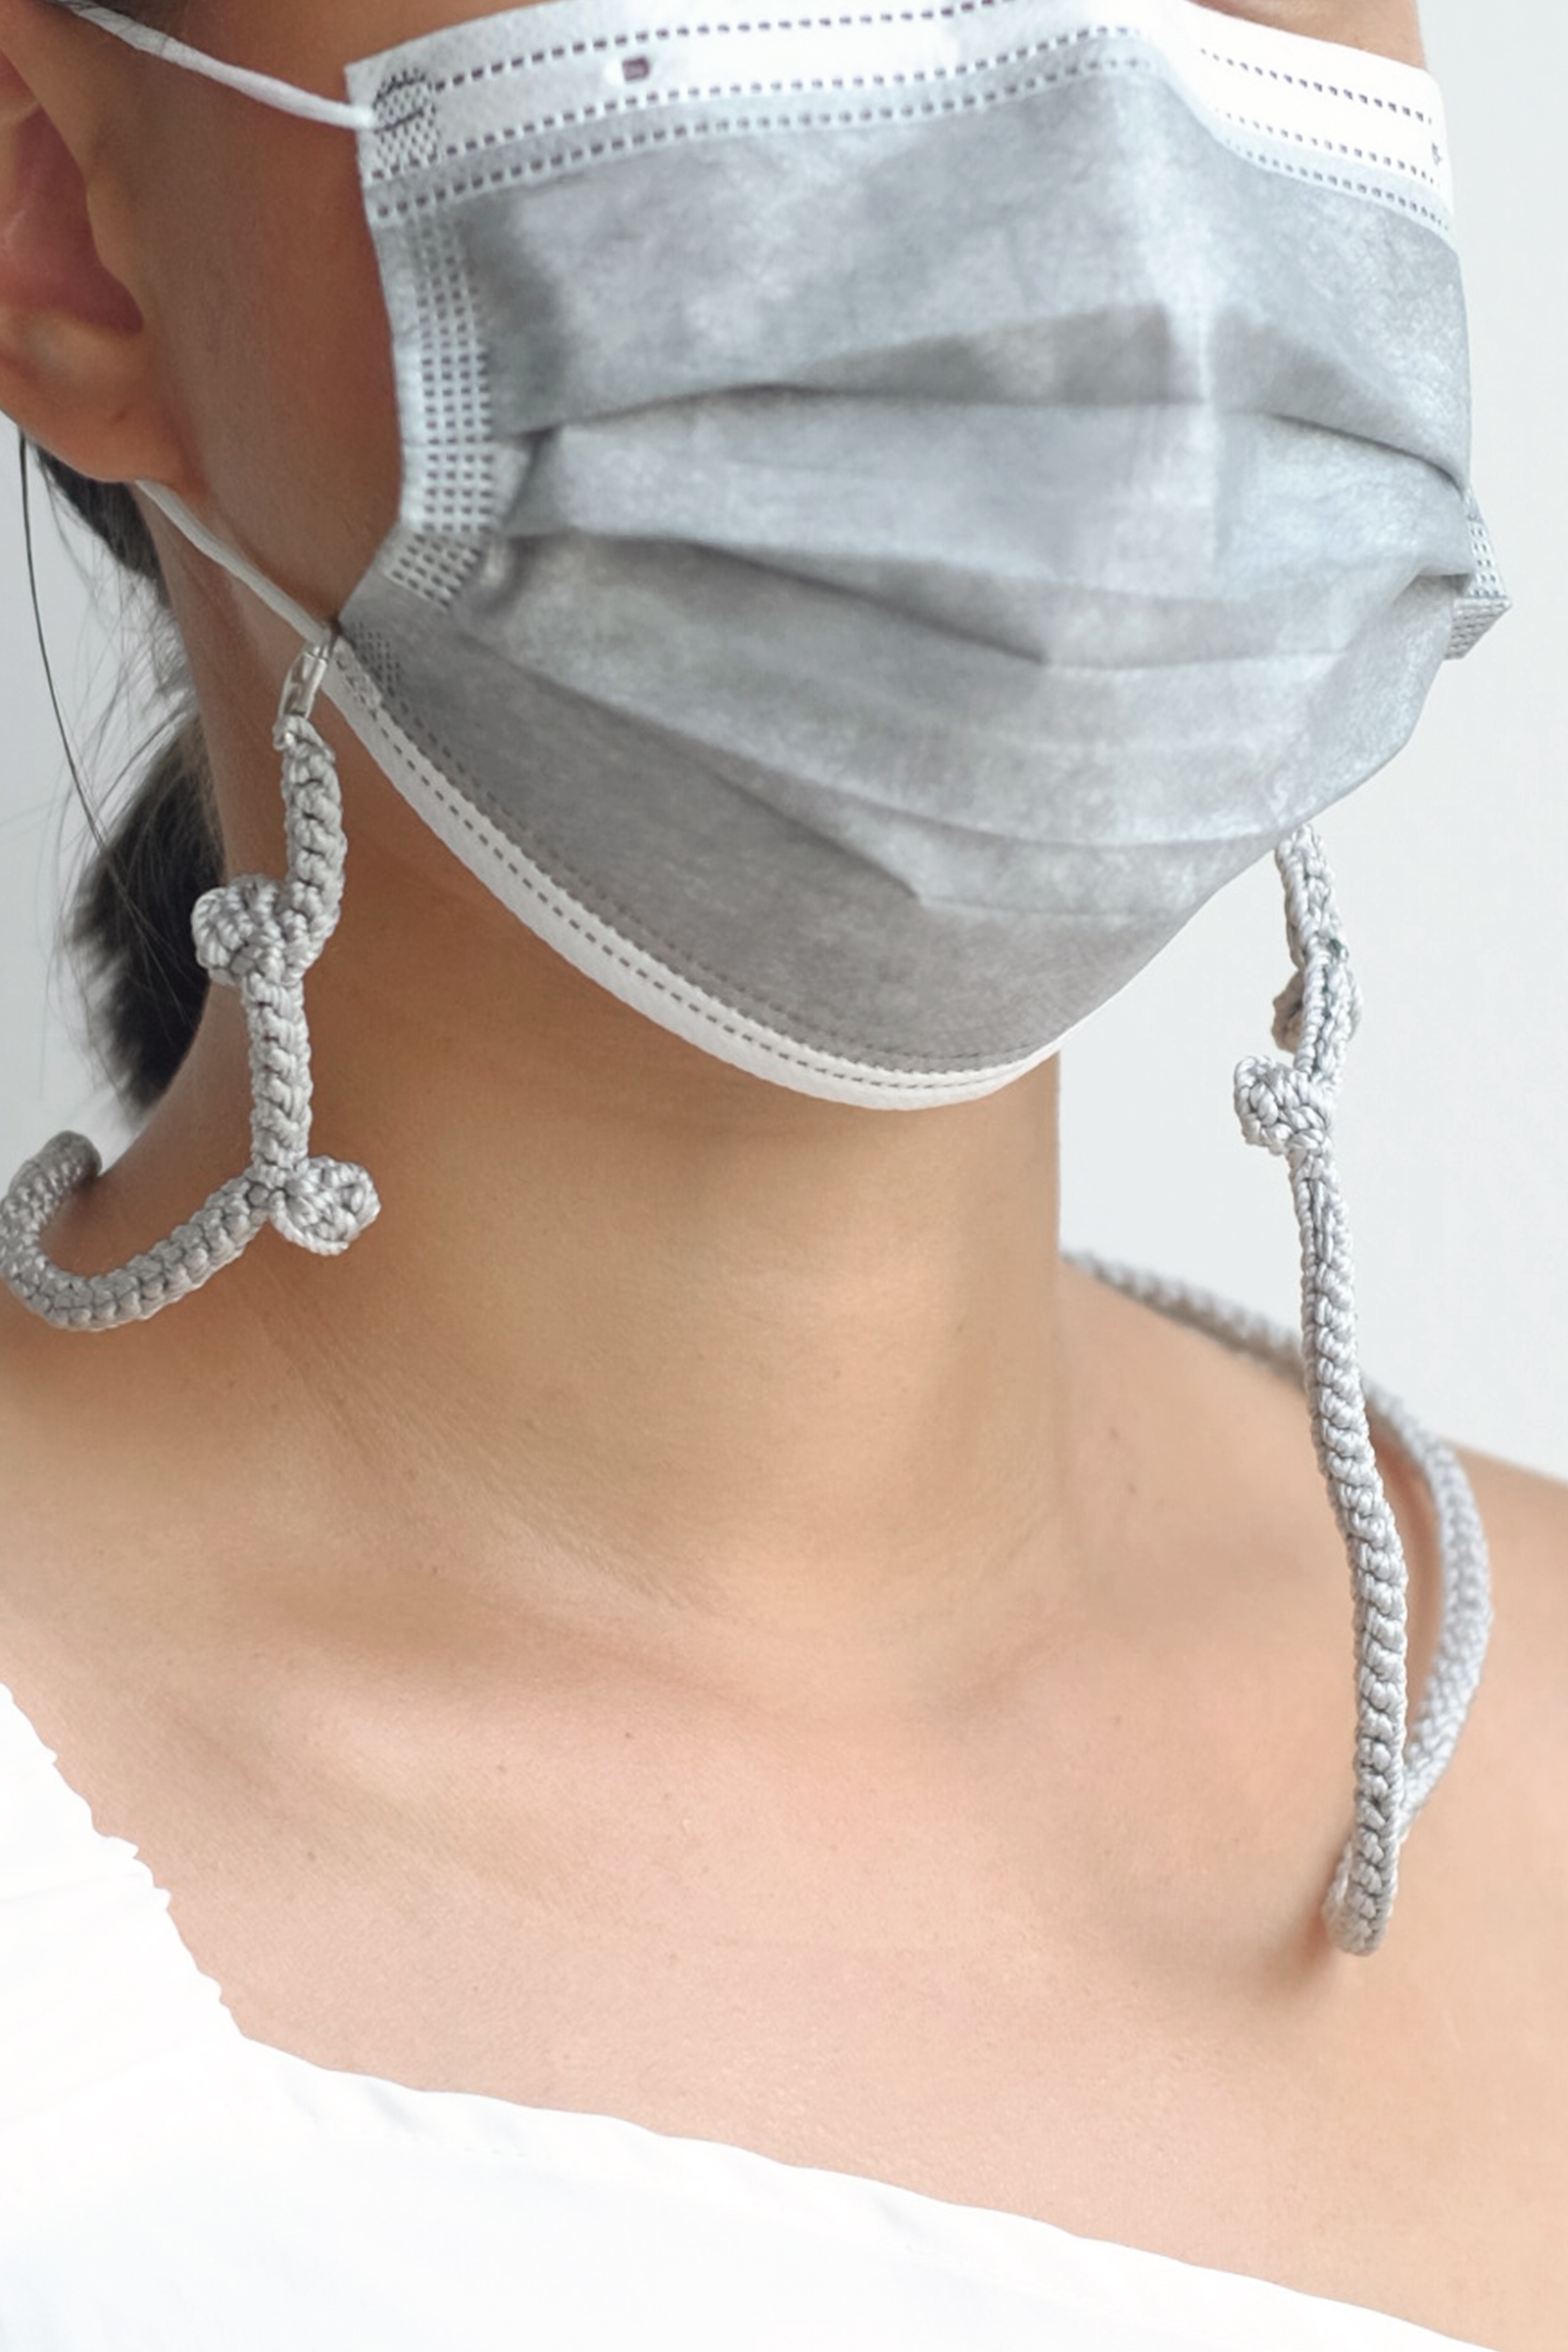 Picture of Handmade Crochet Mask Strap Grey